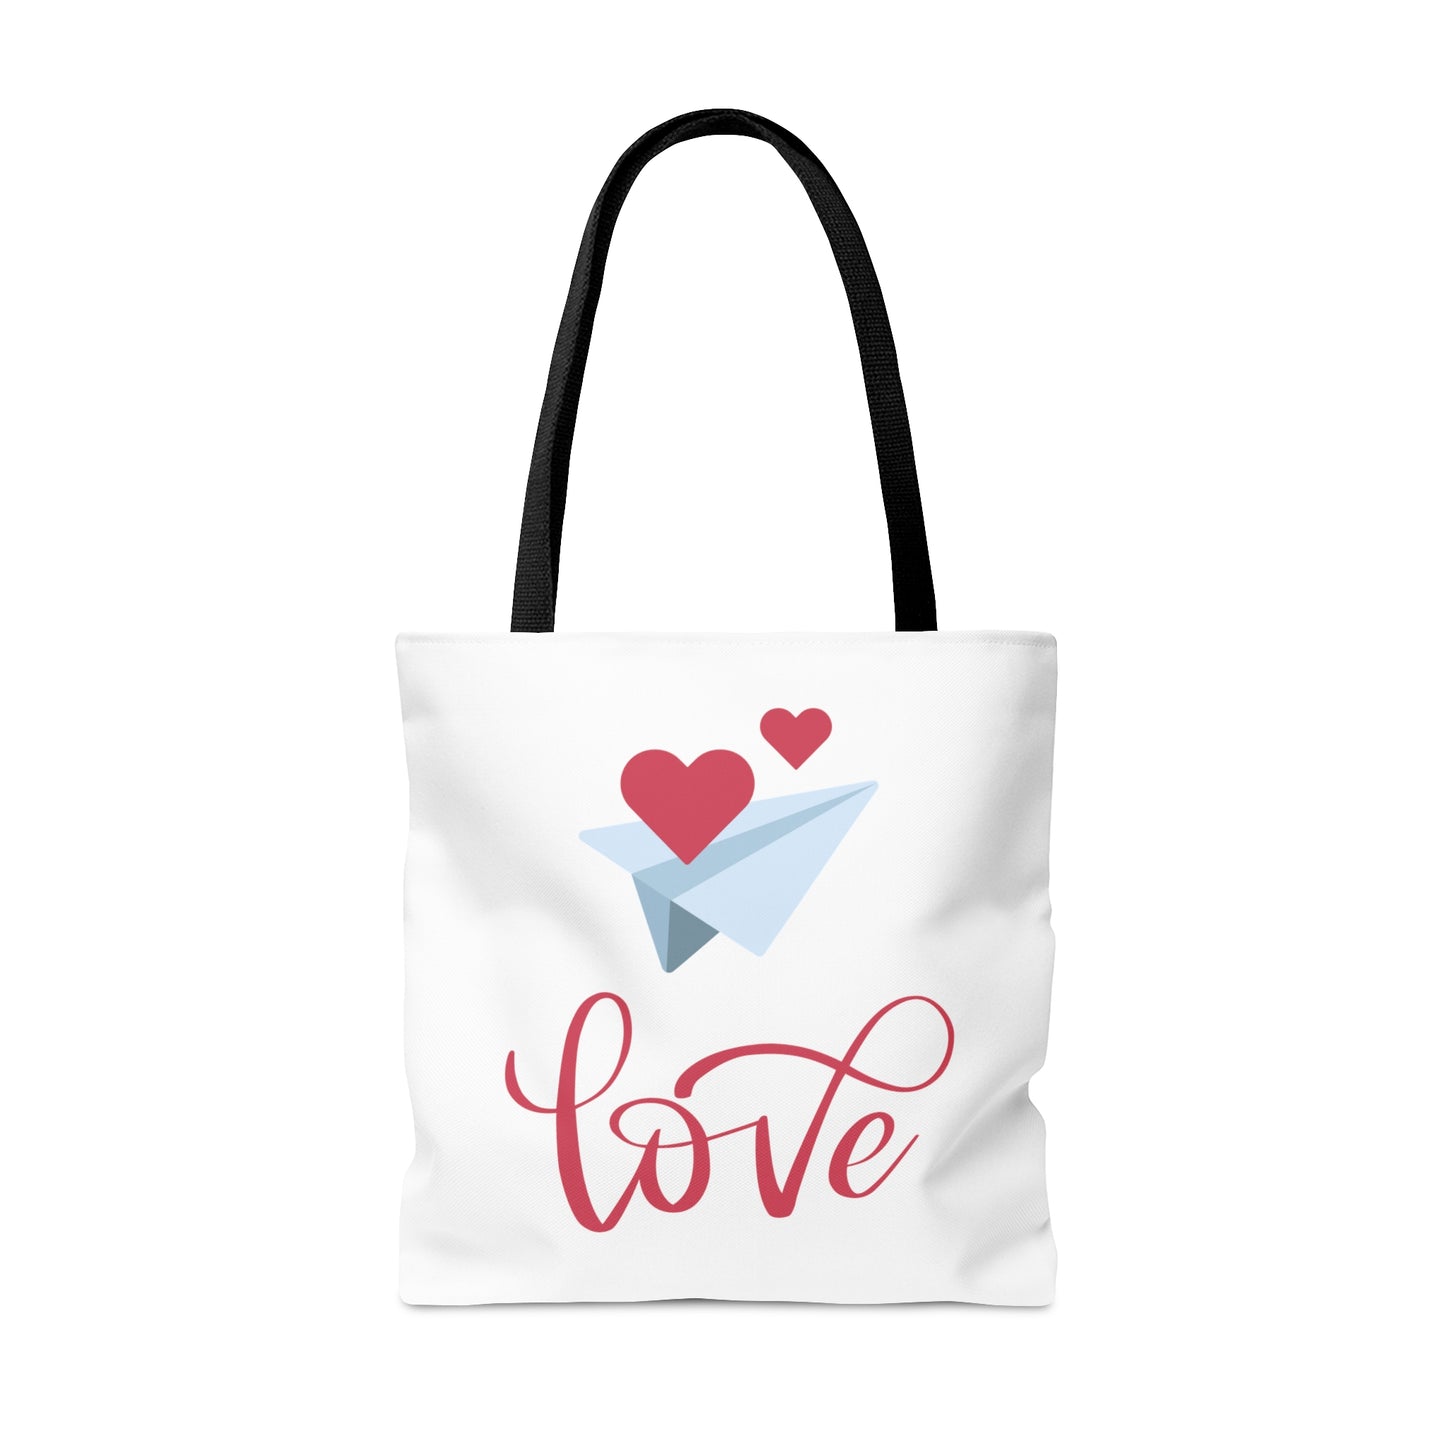 Elegent Love with Heart in the Air Printed Tote Bag, Valentine's Tote Bag